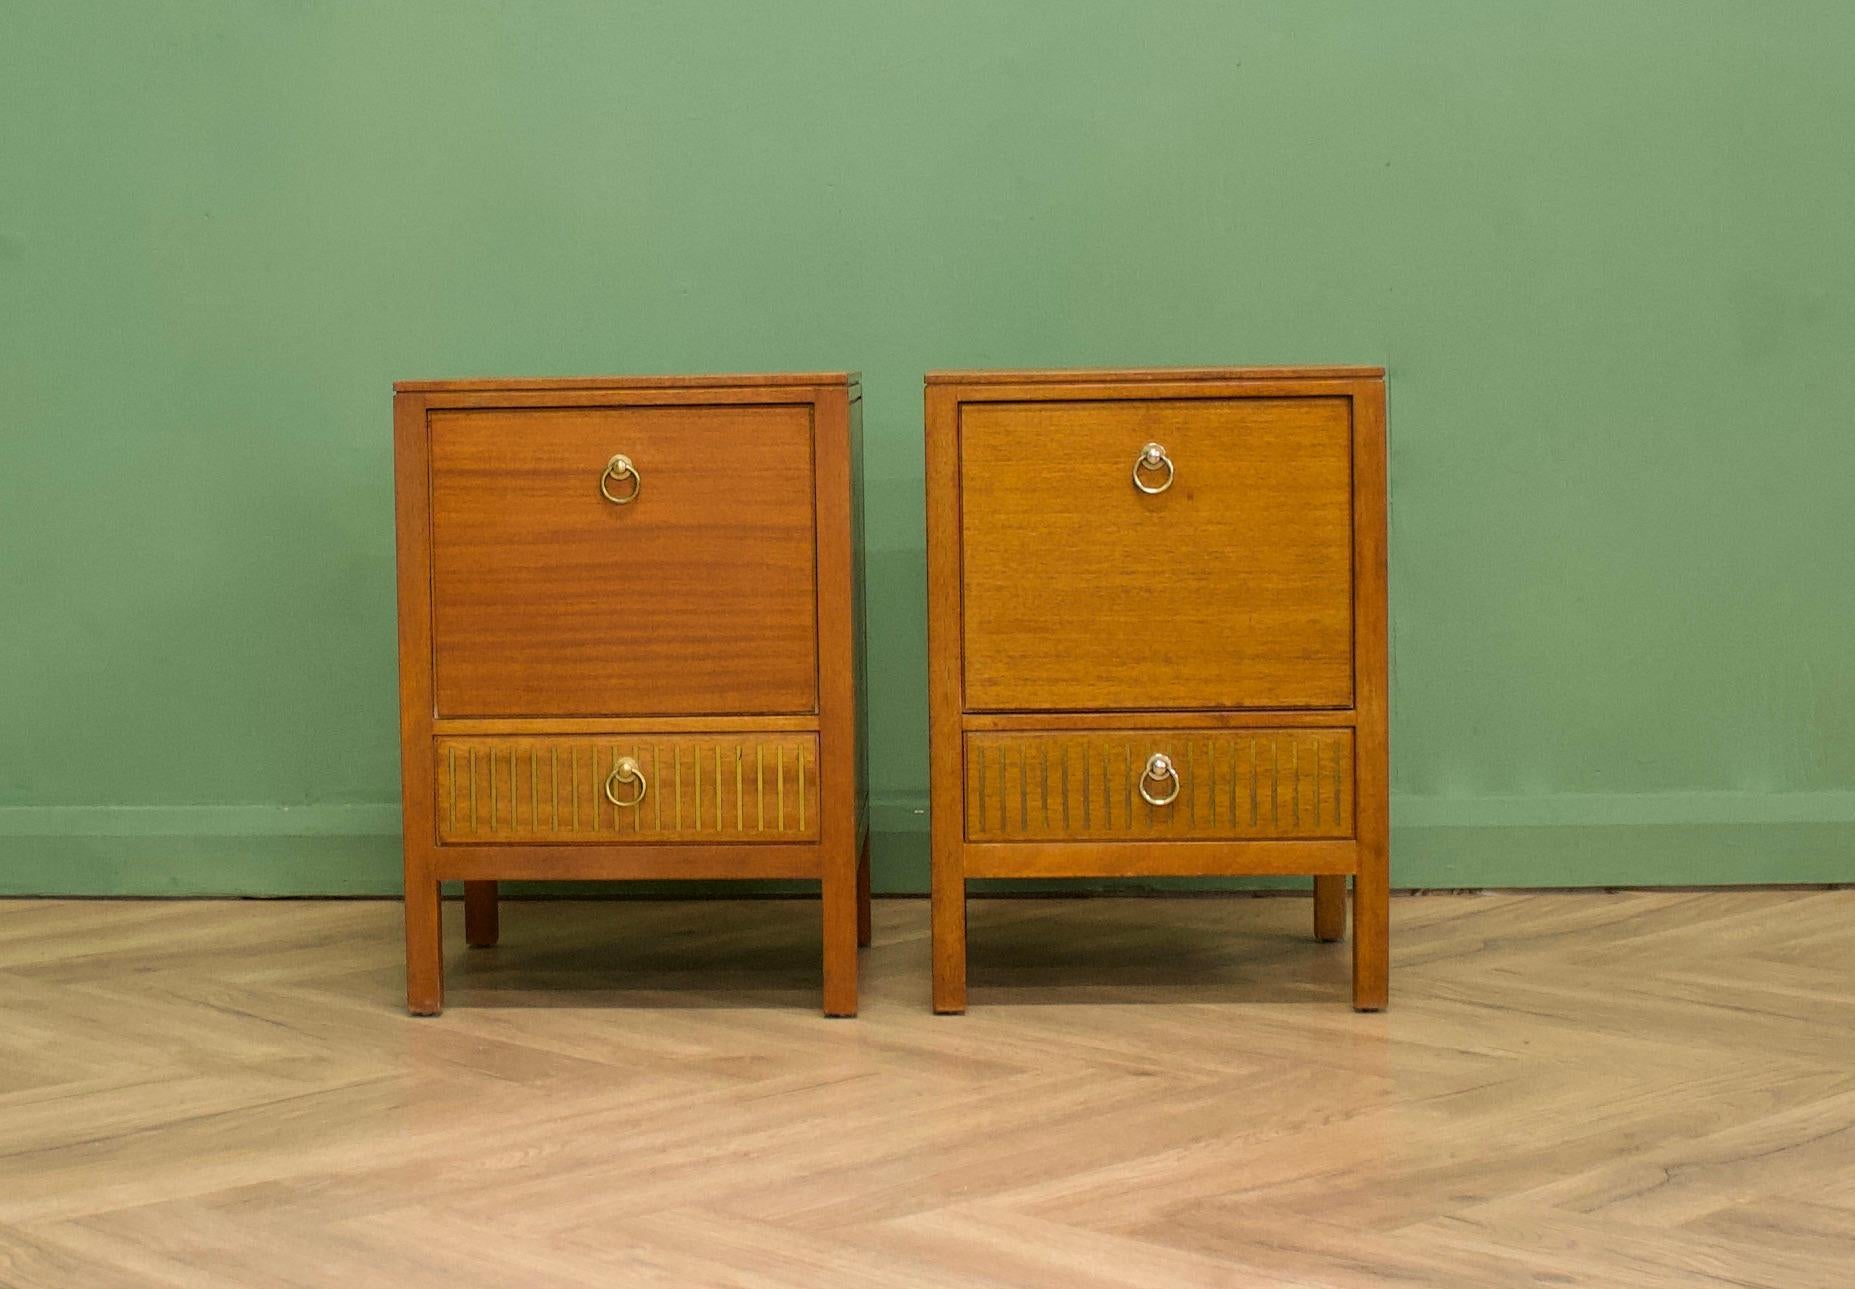 Teak & mahogany bedside tables from Loughborough Furniture - retailed through Heals during the 1950s - designed by Neville Ward and Frank Austin
There are unusual brass inlay details to the bottom
These can be used as a lamp or side tables also